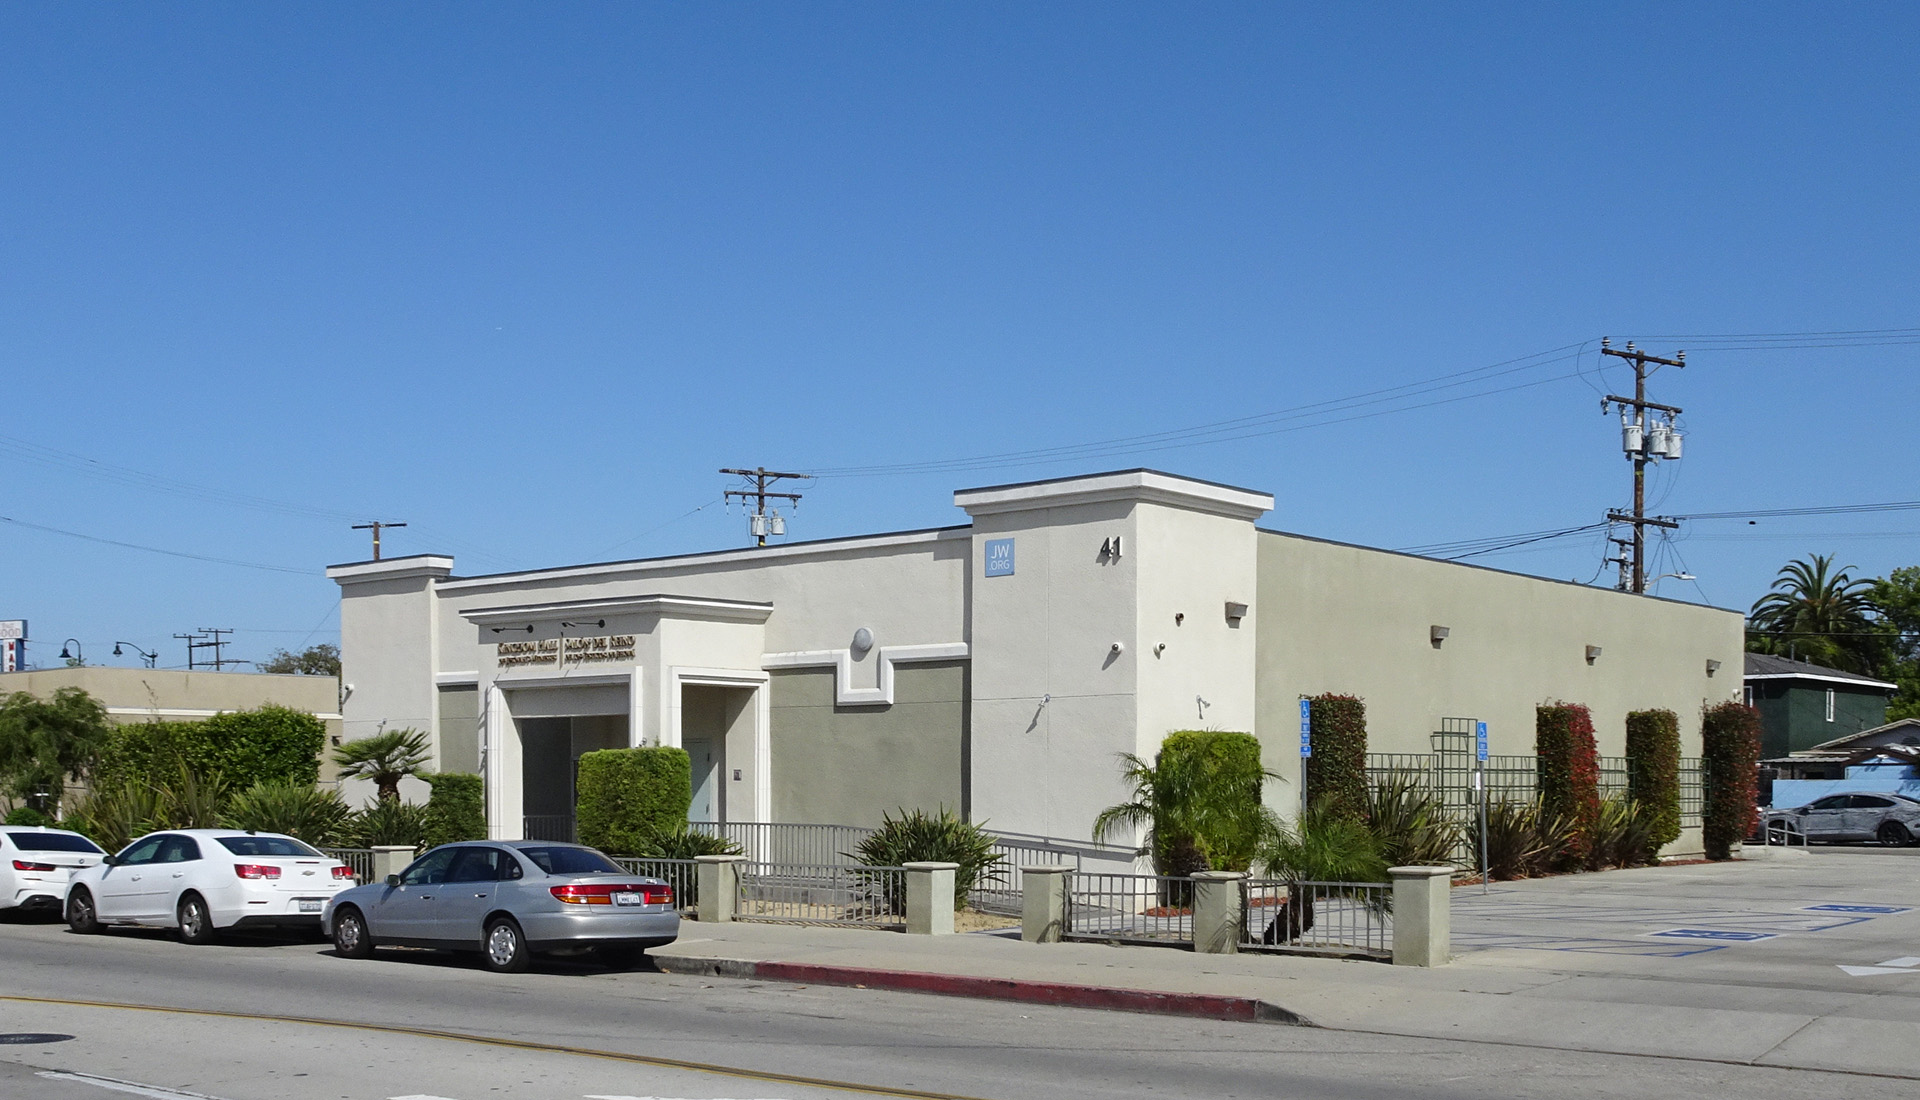 Kingdom Hall of Jehovah’s Witnesses Long Beach